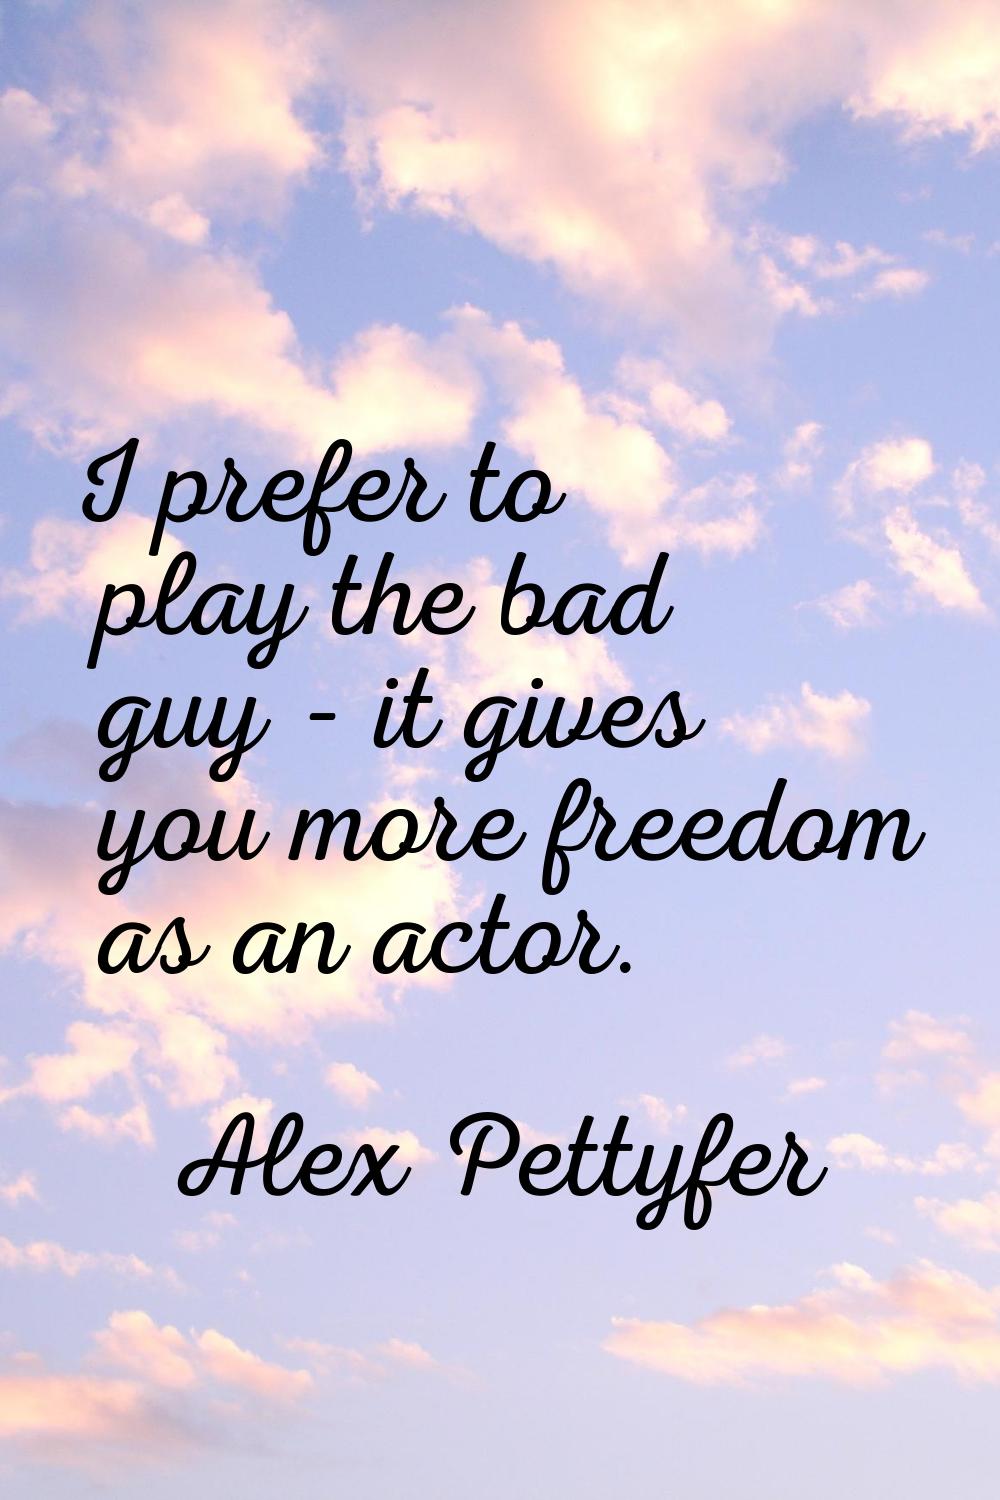 I prefer to play the bad guy - it gives you more freedom as an actor.